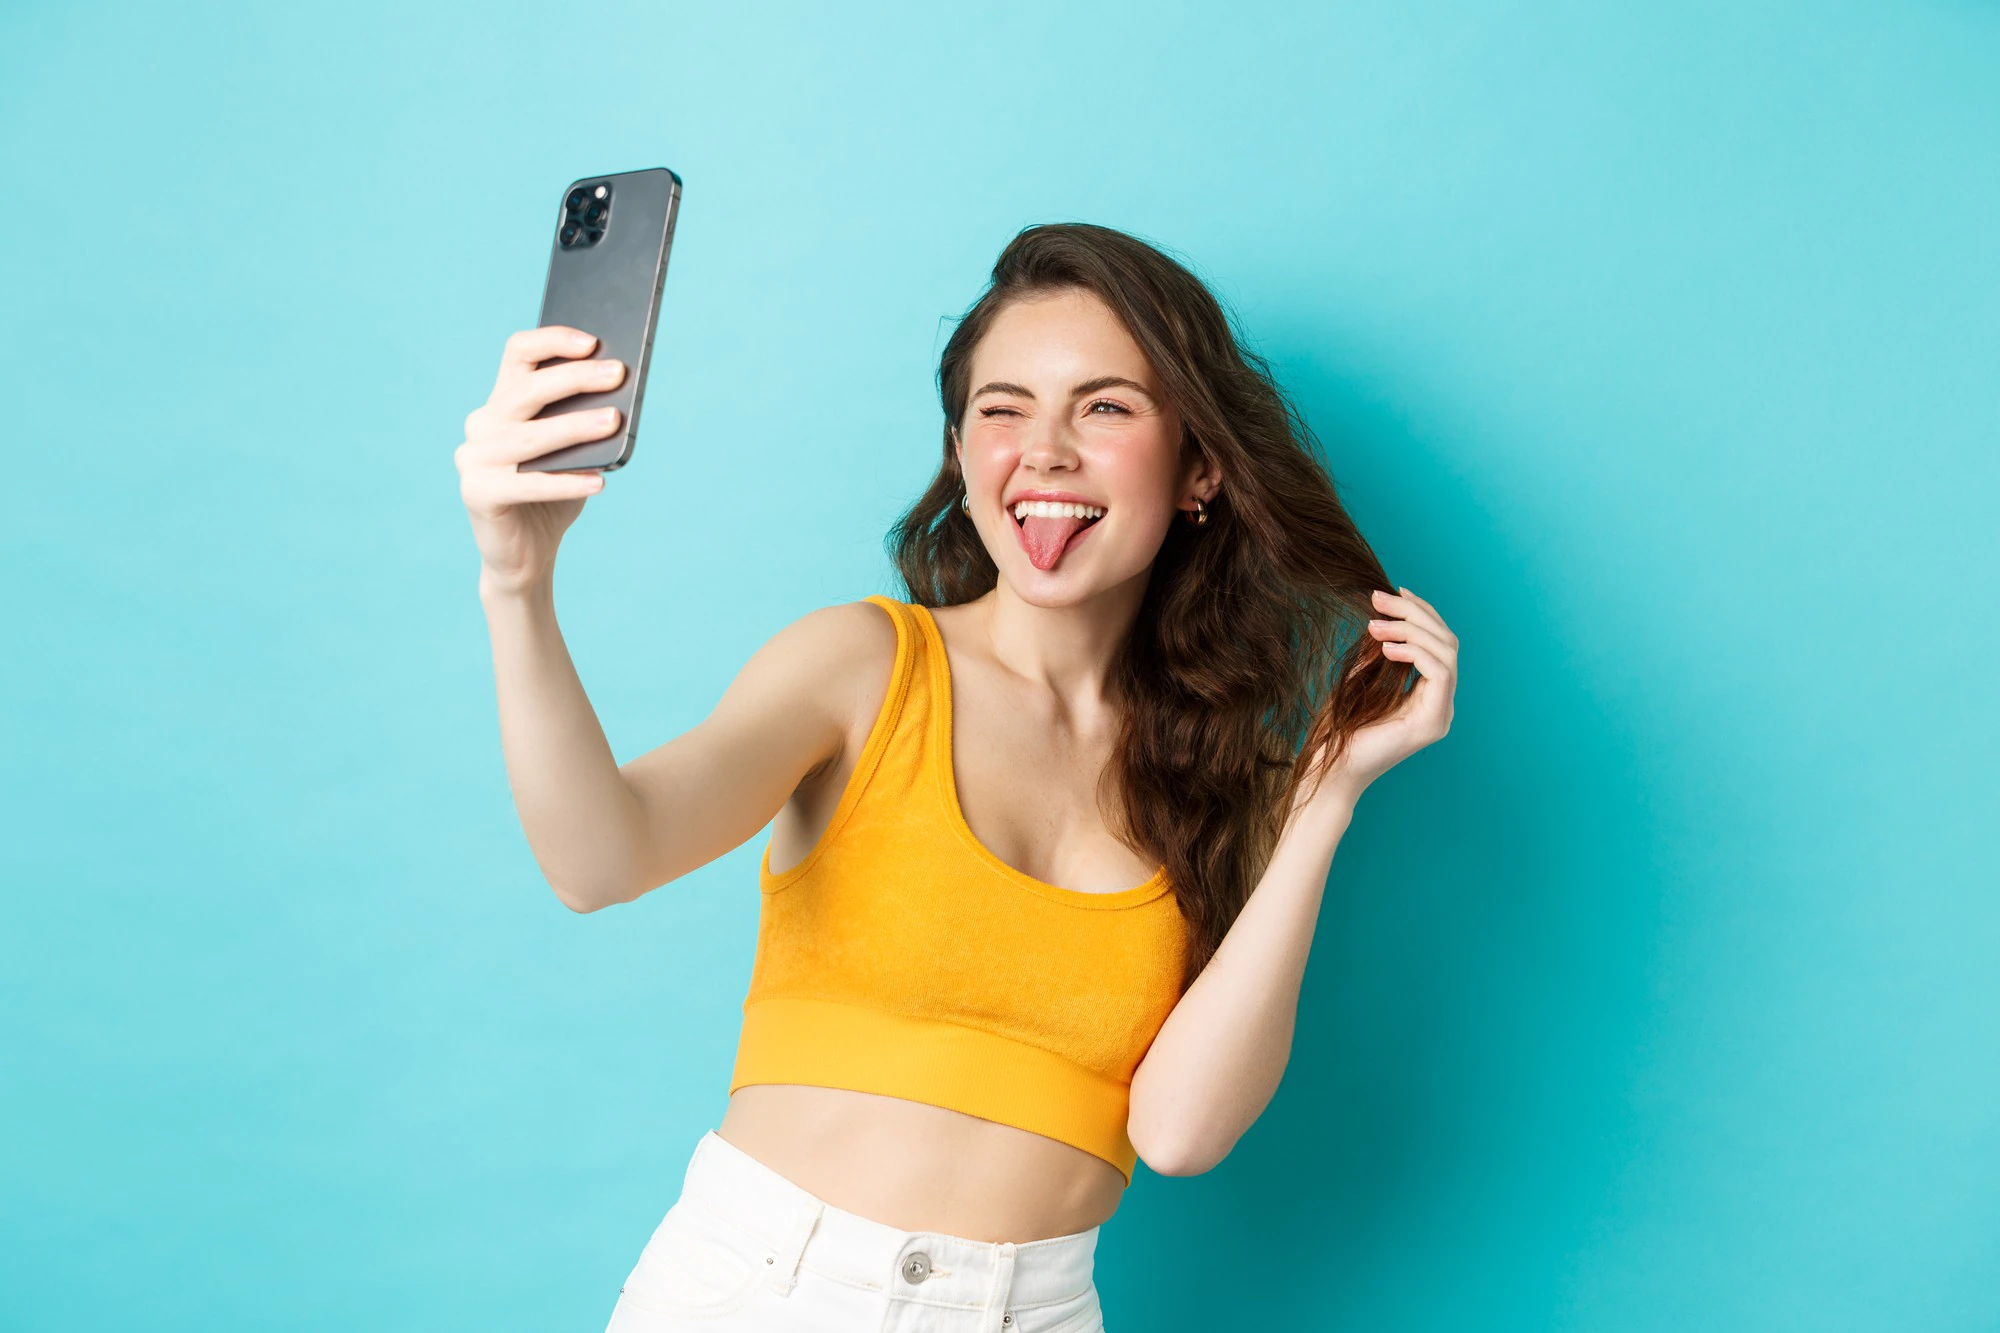 technology lifestyle concept happy young woman making silly faces while taking selfie smartphone app with filters standing against blue background 1258 70390